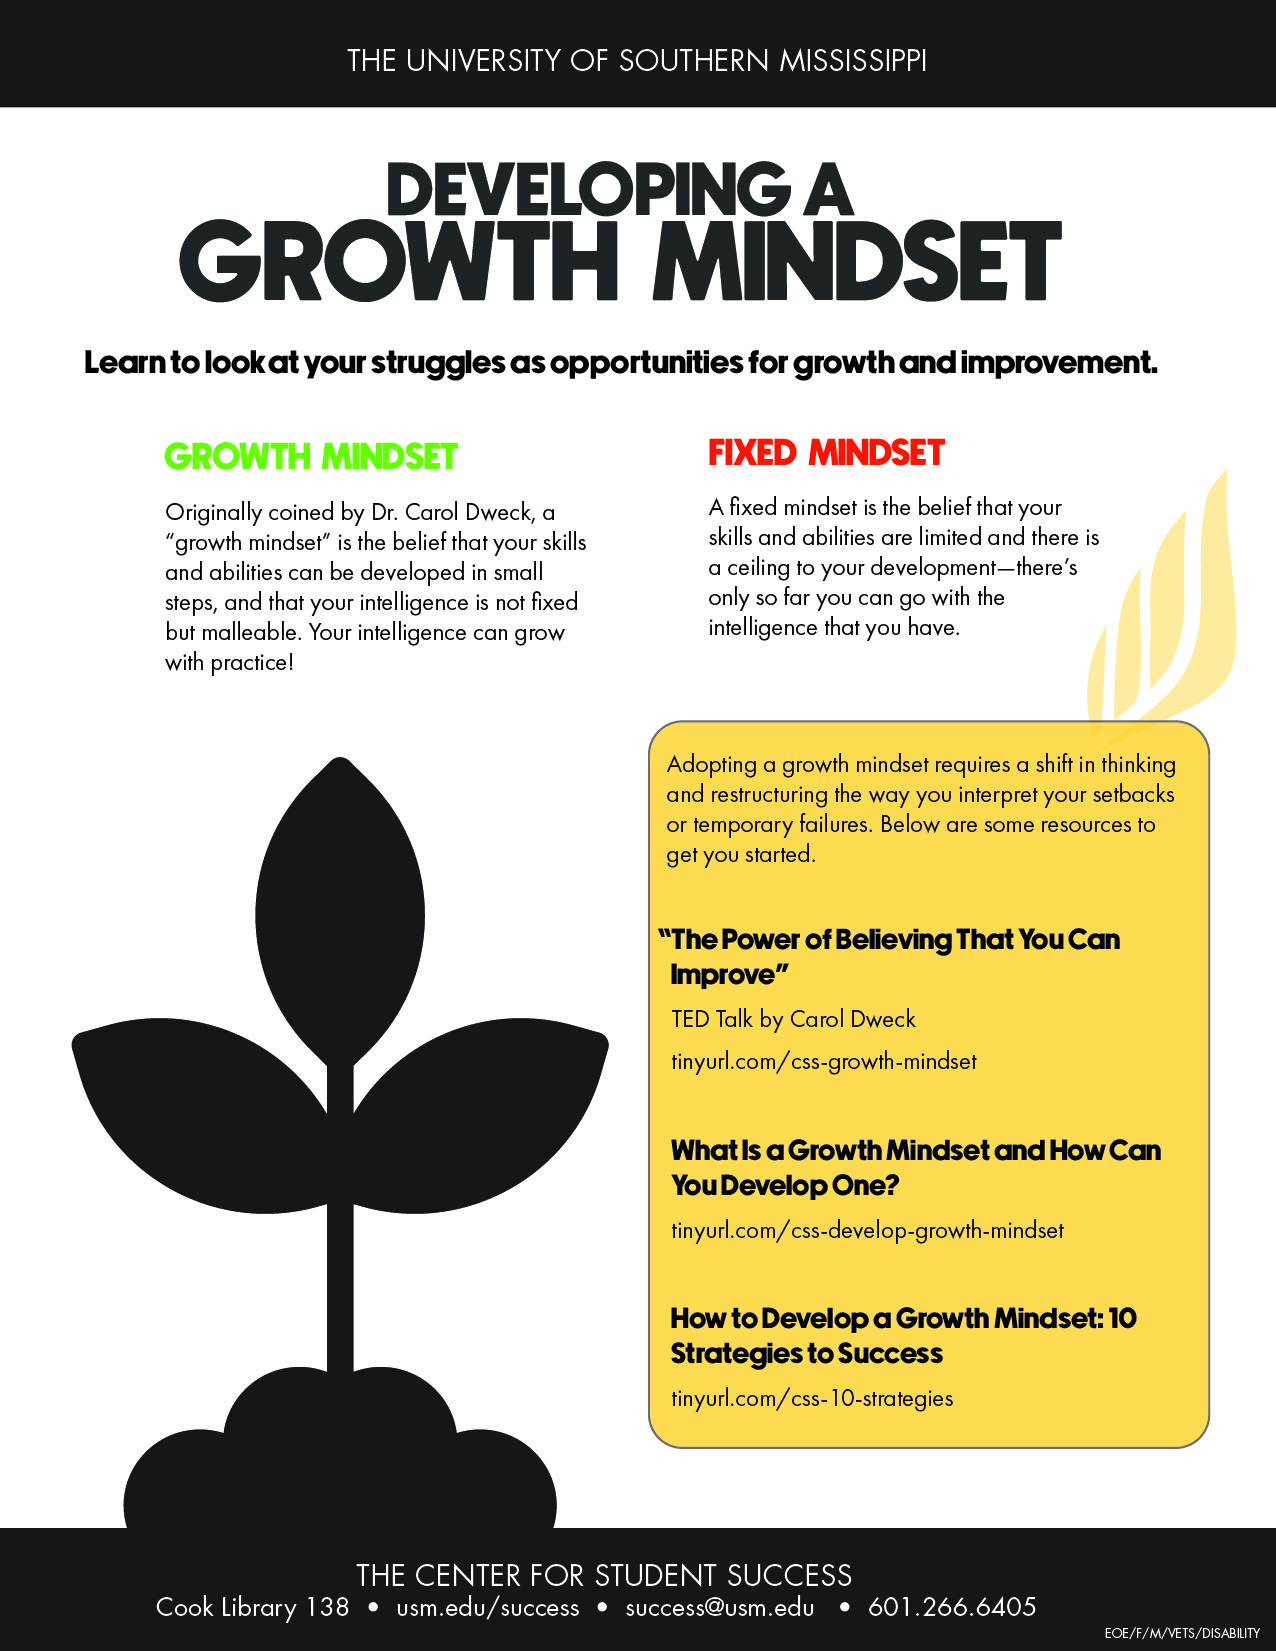 Do You Have a Growth Mindset?